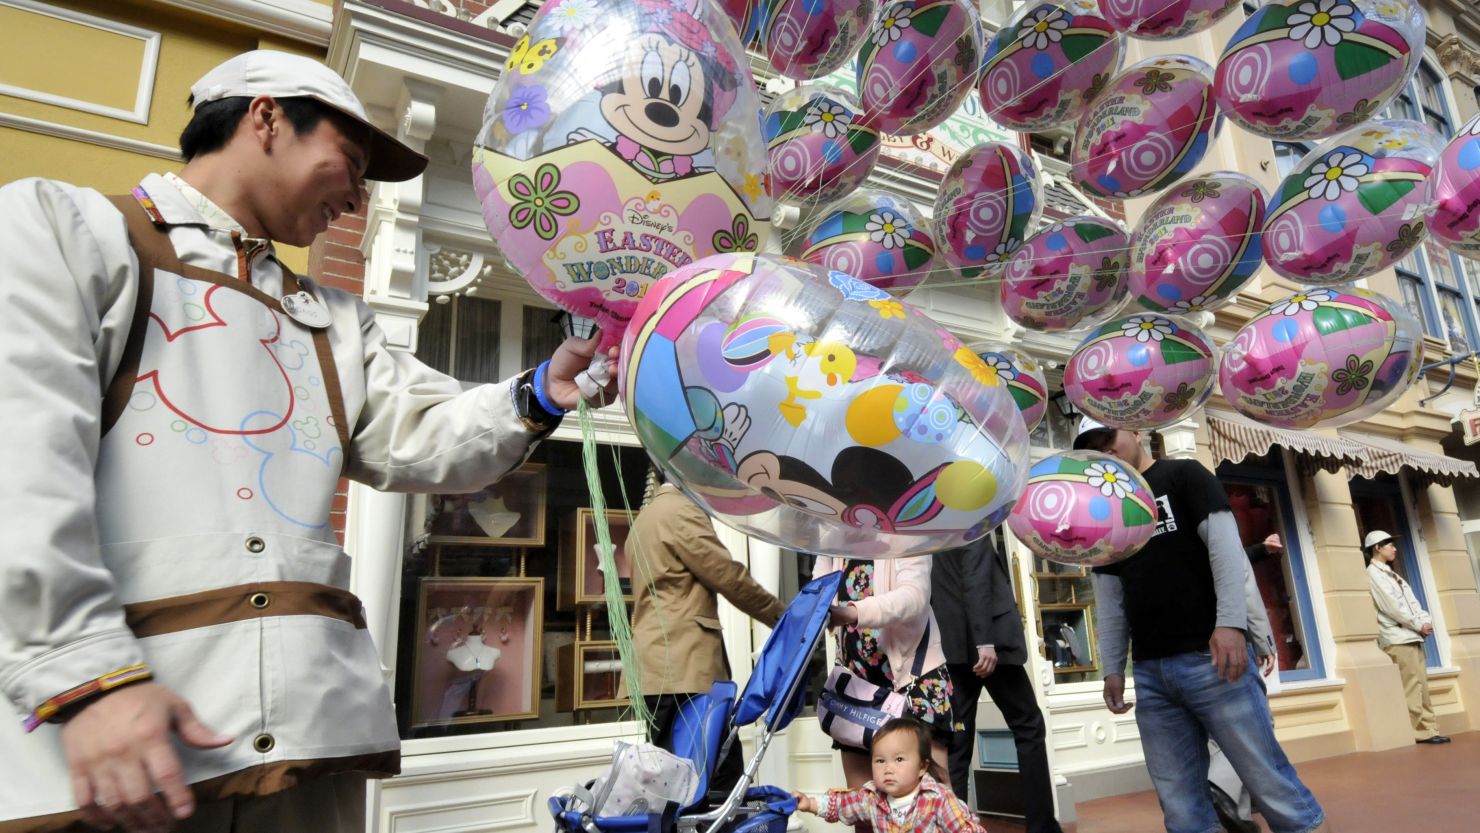 File photo of a balloon seller at the Tokyo Disneyland greeting visitors in 2011.